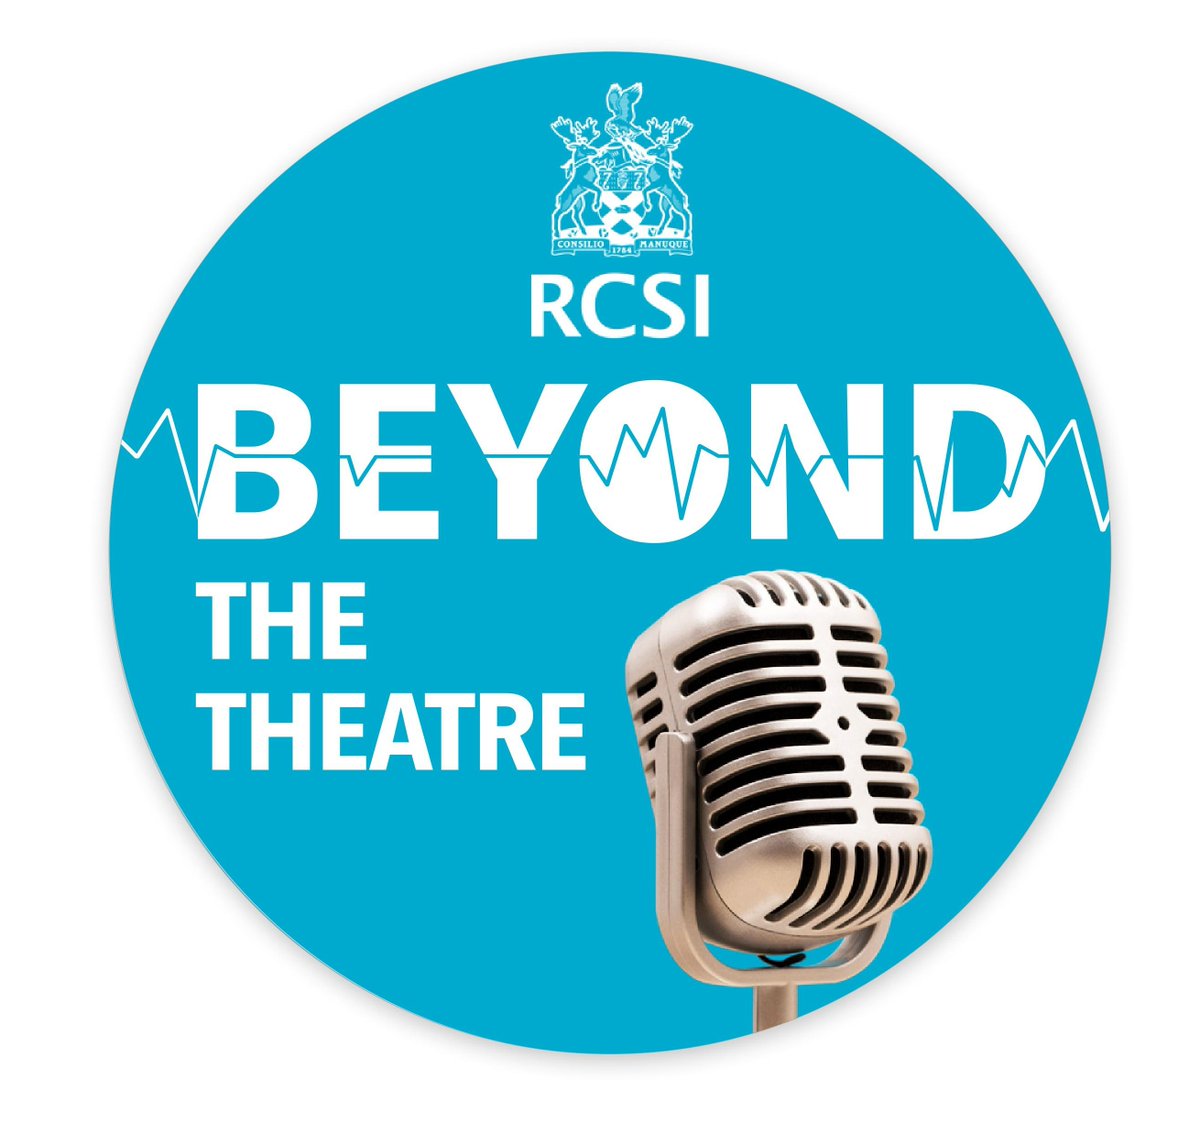 Interested in robotic surgery? Listen to the latest episode of beyond the theatre with Prof Barry Maguire, Prof Kevin Barry, Ms Eabhann O'Connor, Ms Christina Fleming and Mr Rory Kennelly who discuss the use of robotics in surgery msurgery.ie/home/beyond-th…